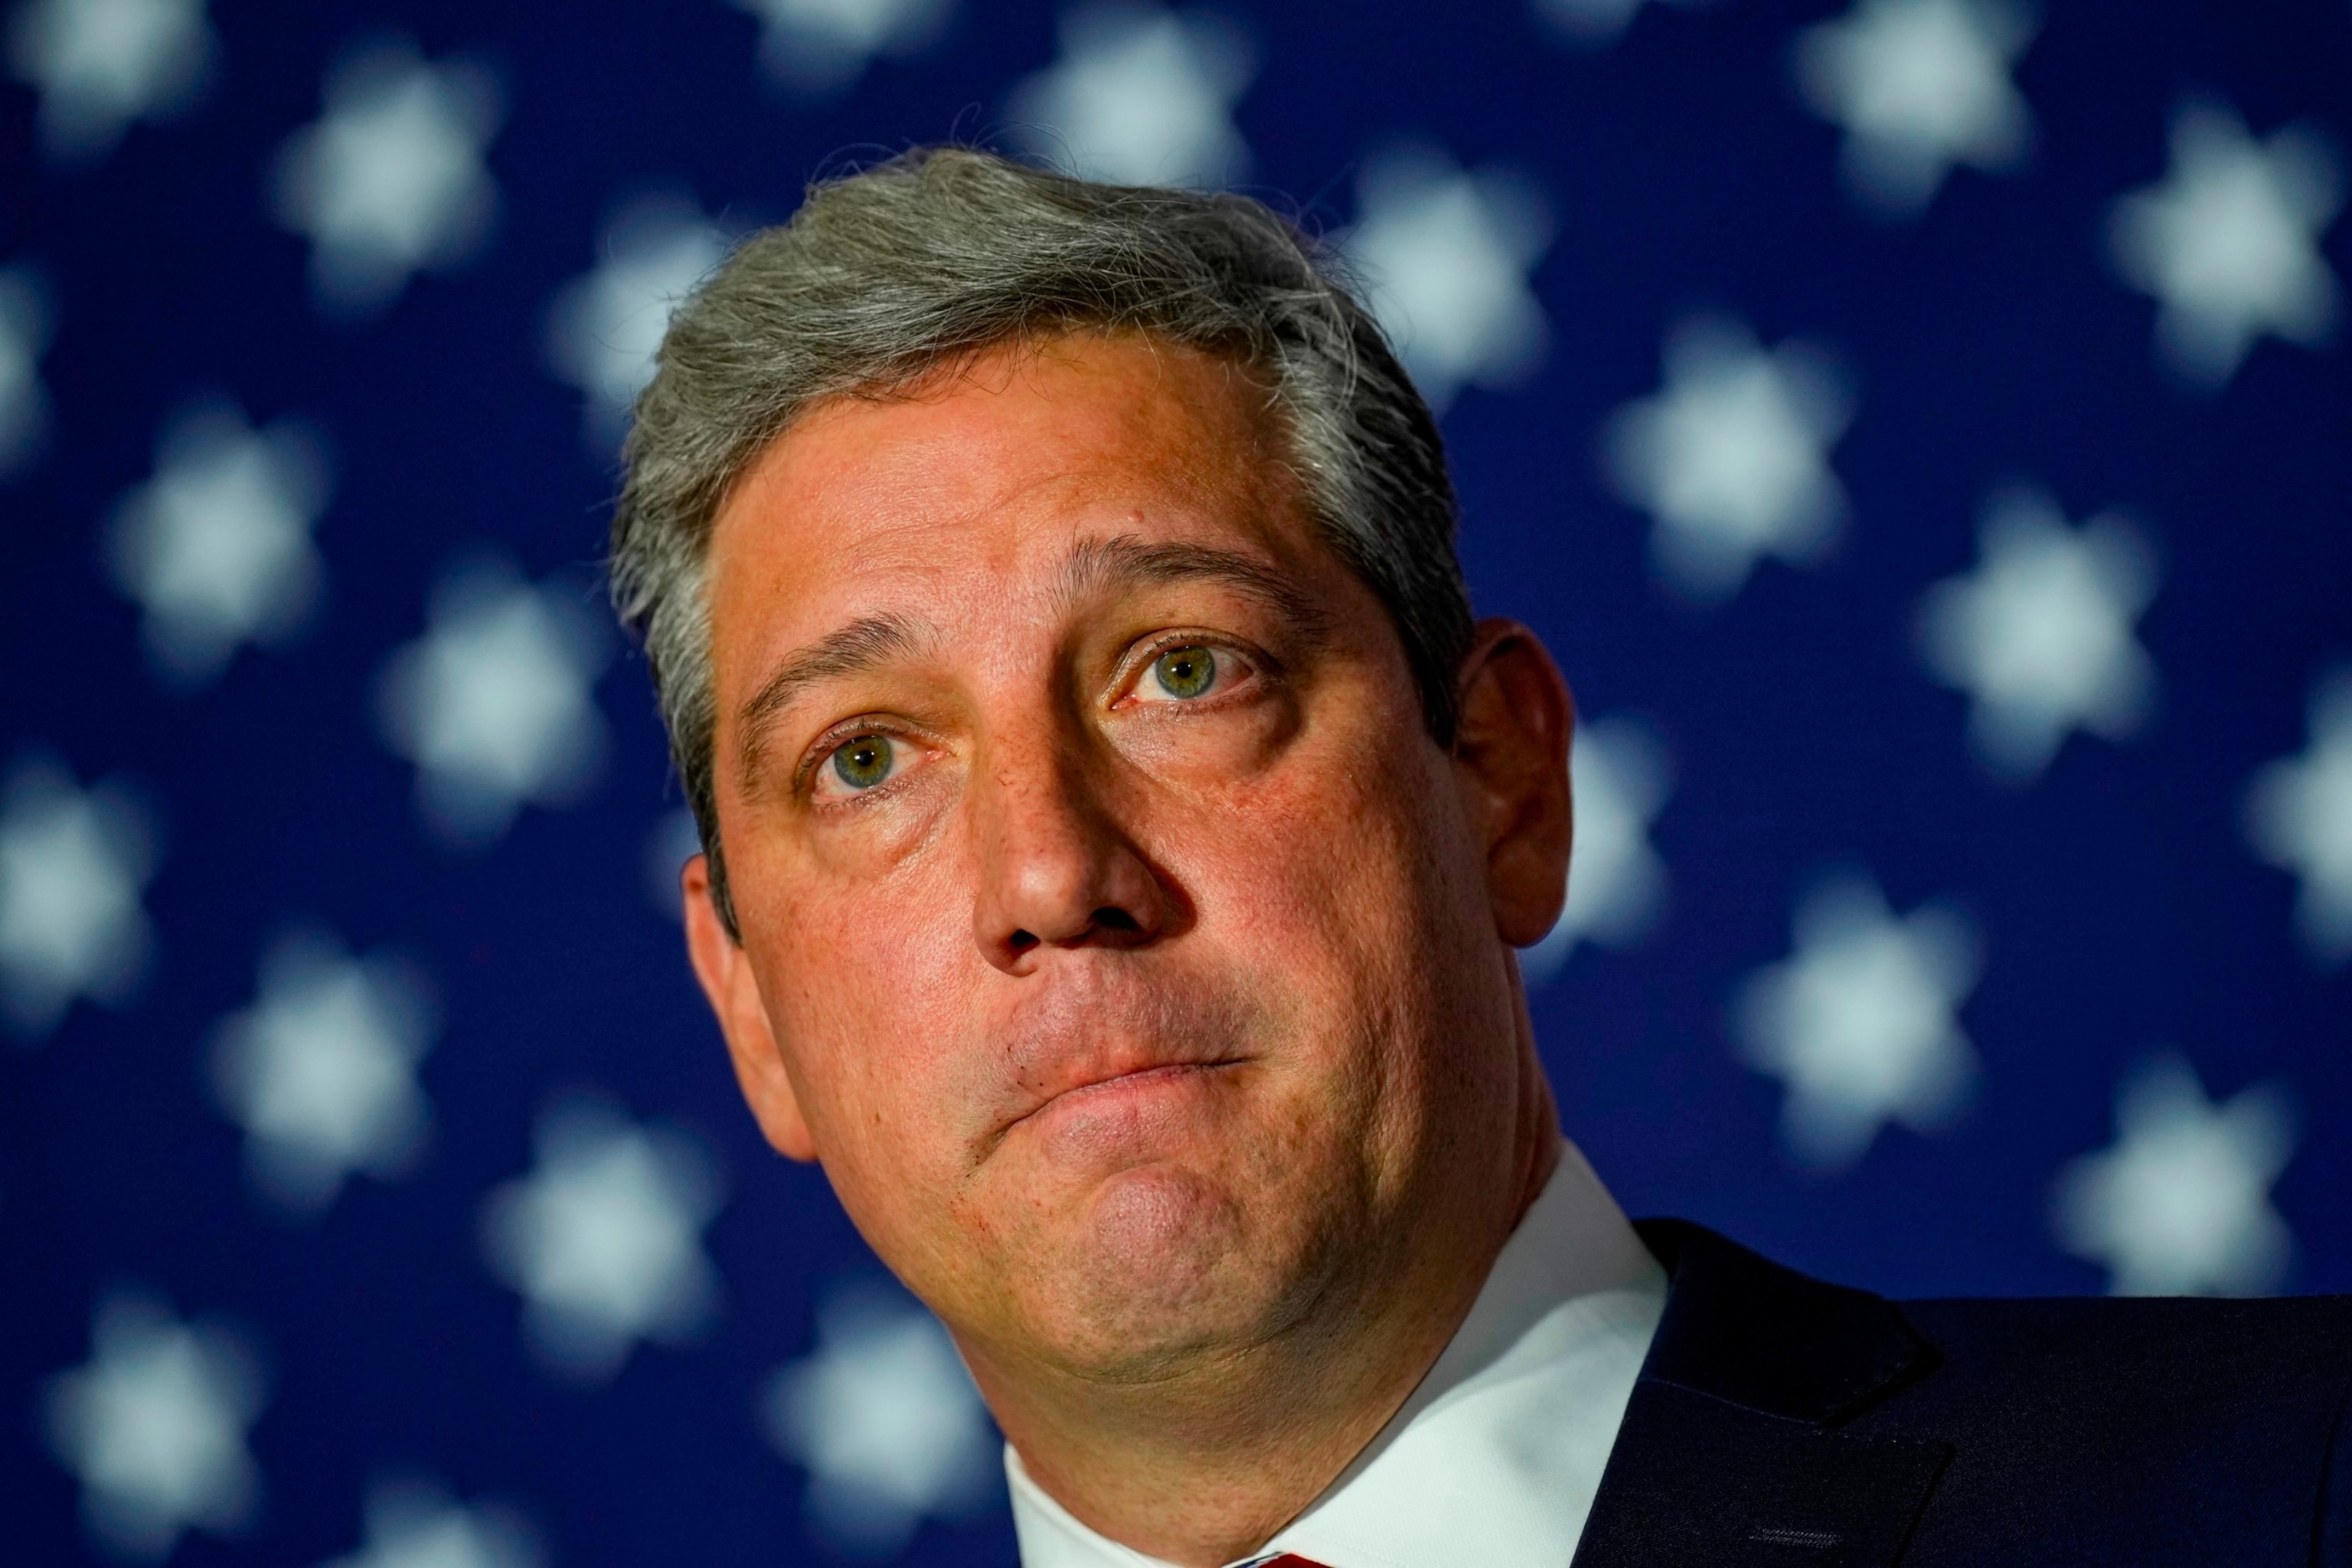 PHOTO: Democratic candidate for Senate Rep. Tim Ryan speaks during an election night event in Boardman, OH, Nov. 8, 2022.